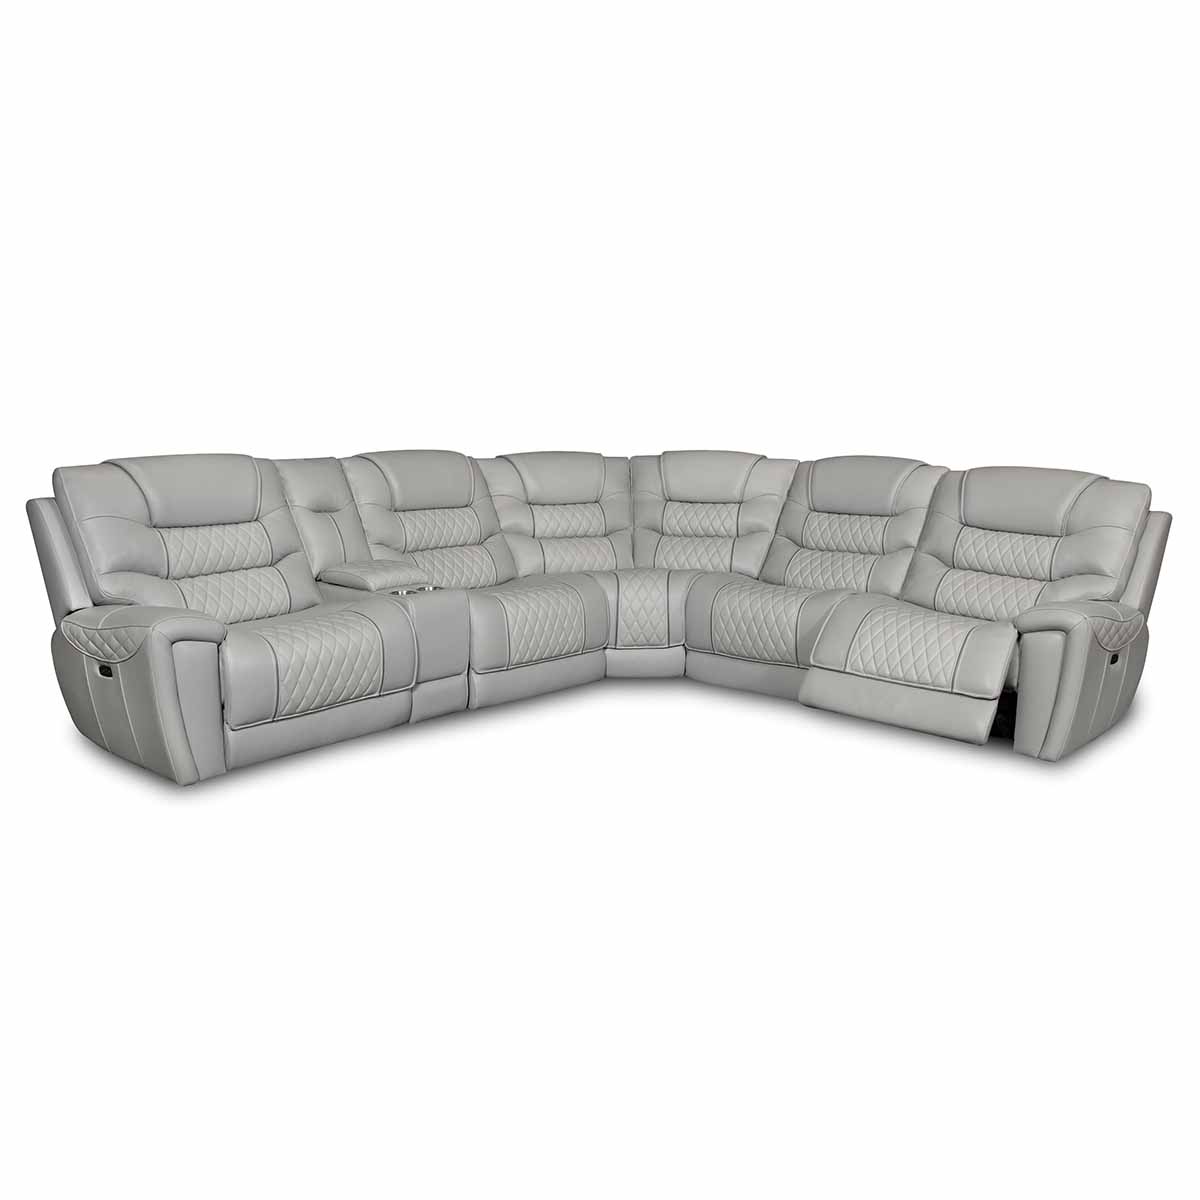 Corinthian Furniture Breckenridge Power Reclining 3-Pc Sectional with Power Headrests